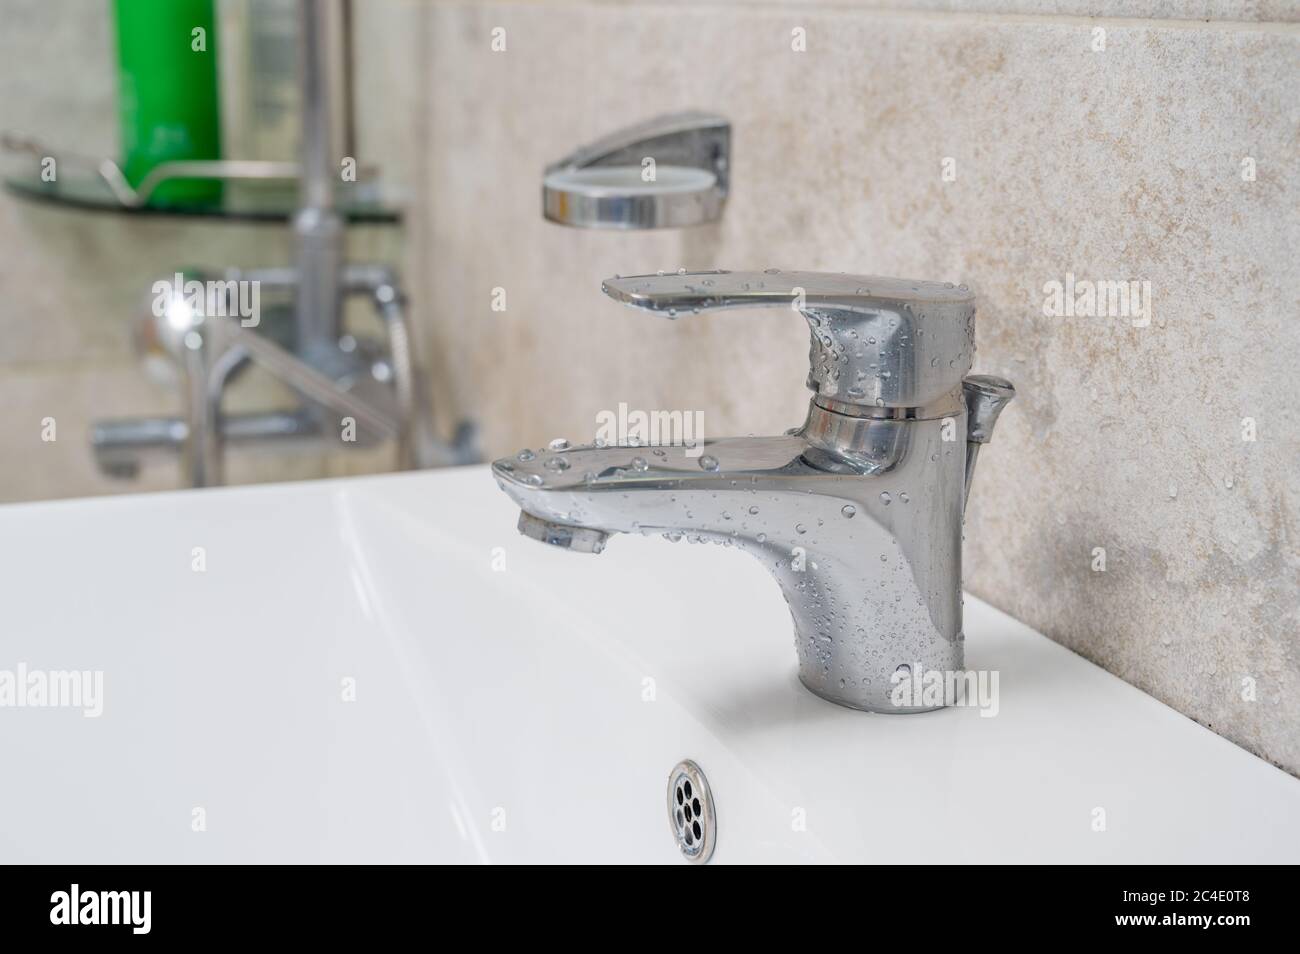 Disinfecting the bathroom. Faucet cleaning and disinfection. Prevention of coronavirus infection. Stock Photo